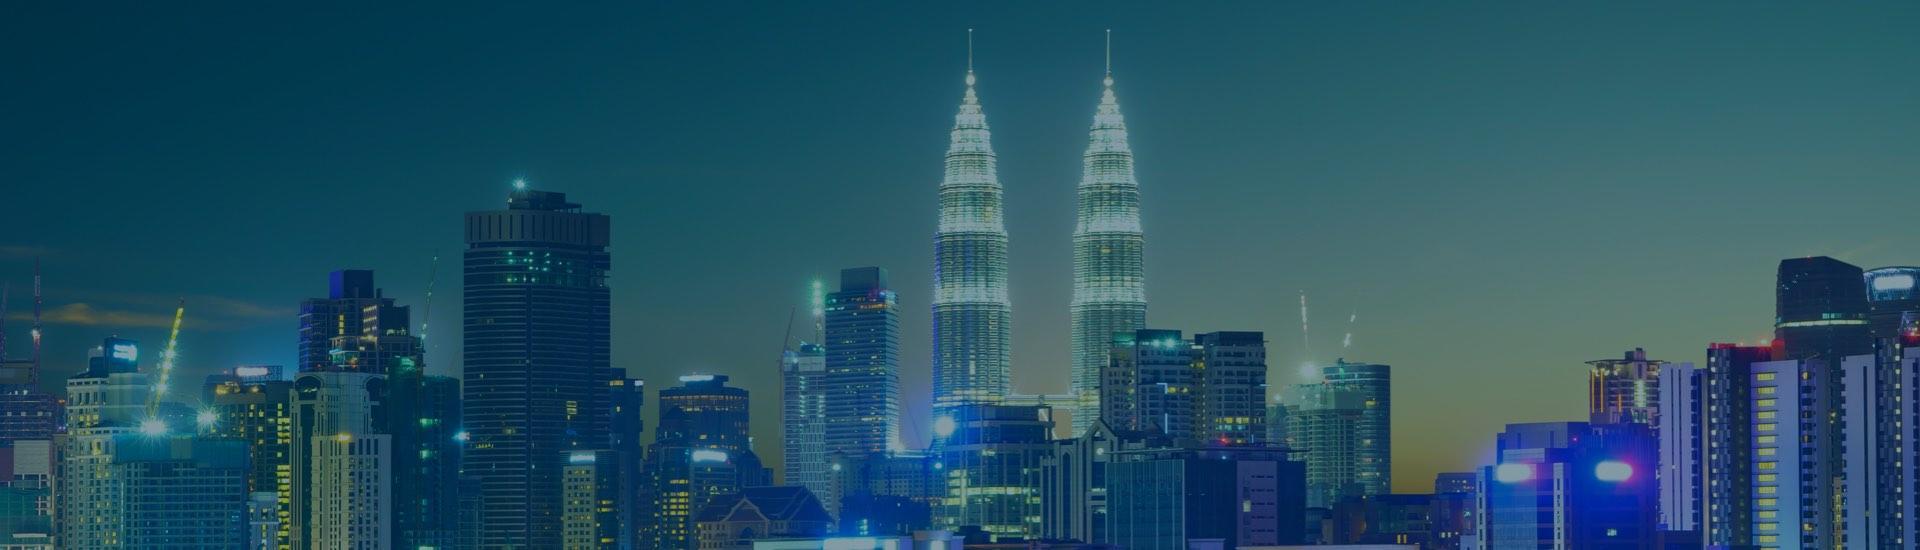 Find and Book Any Hotel in Kuala Lumpur